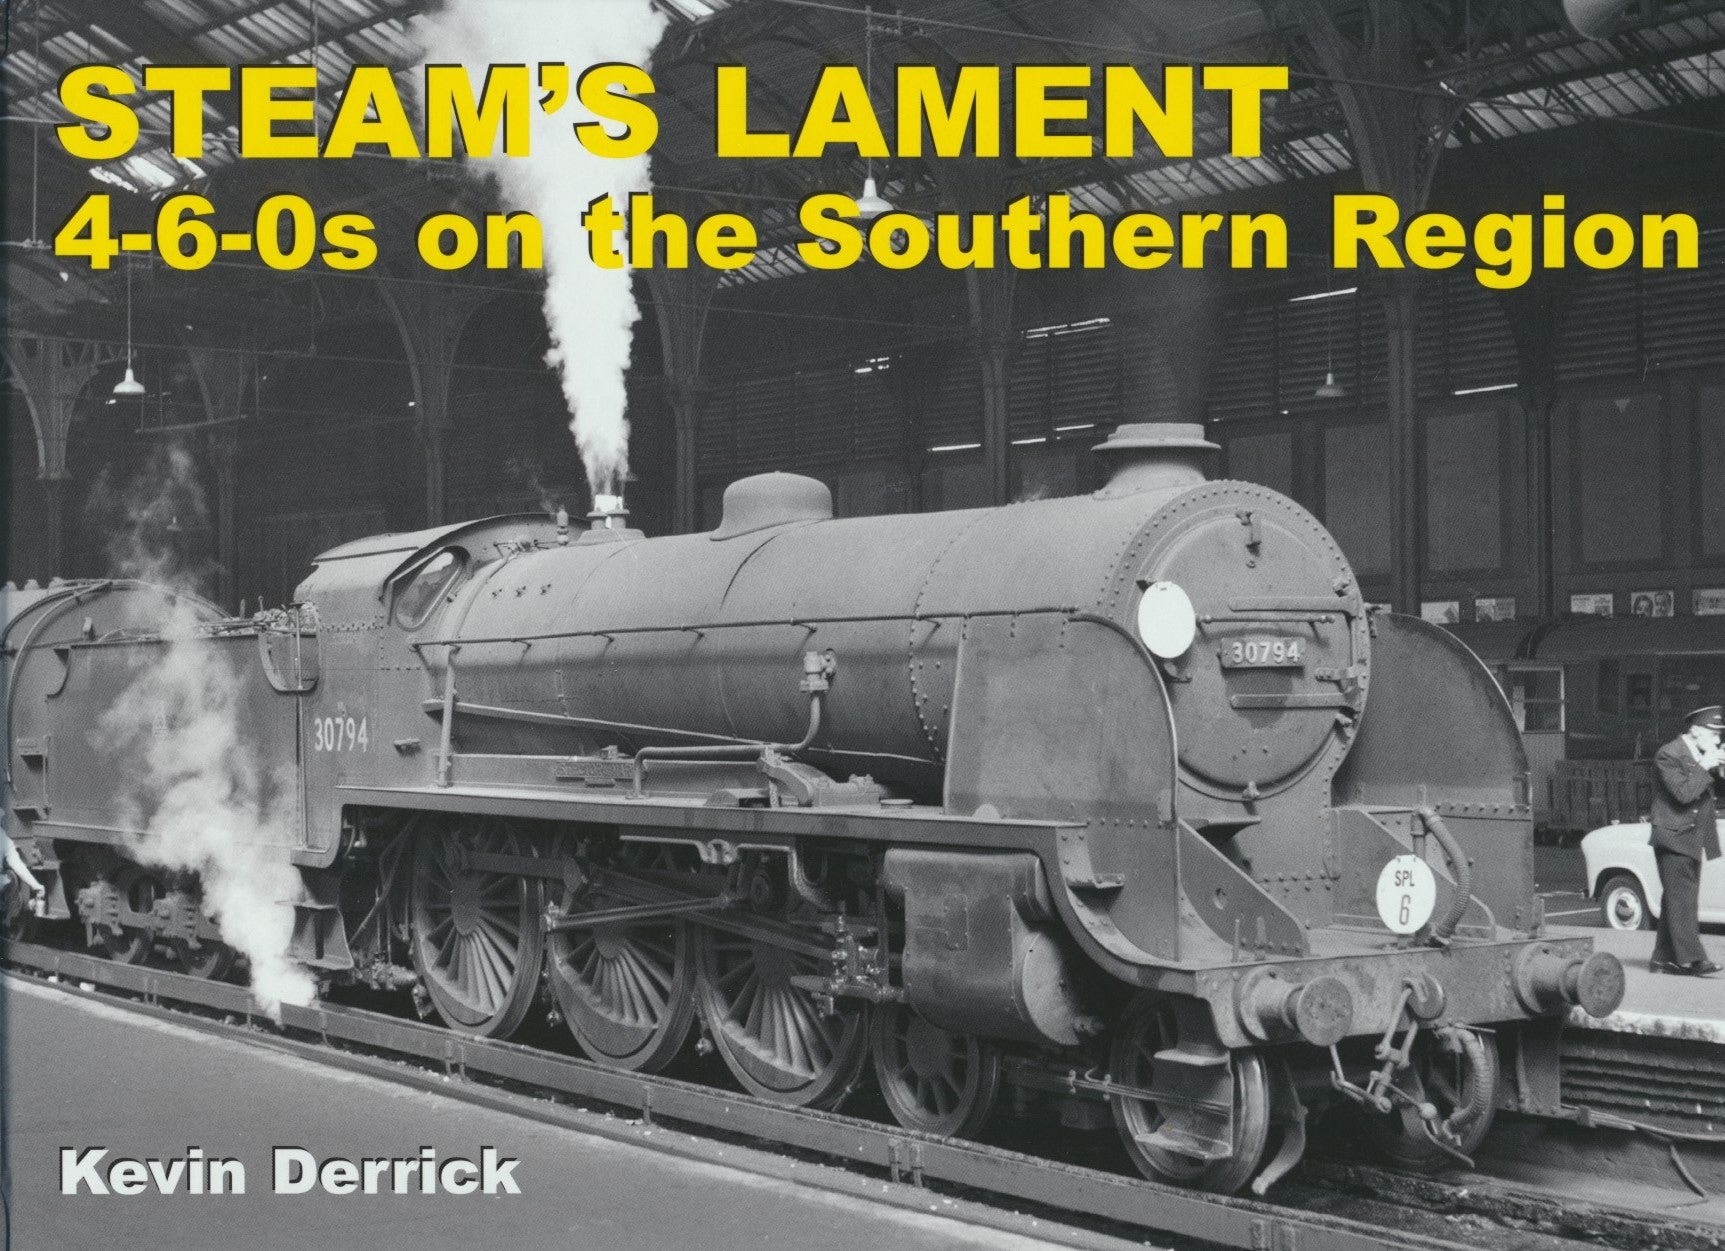 STEAM'S LAMENT - 4-6-0s on the Southern Region